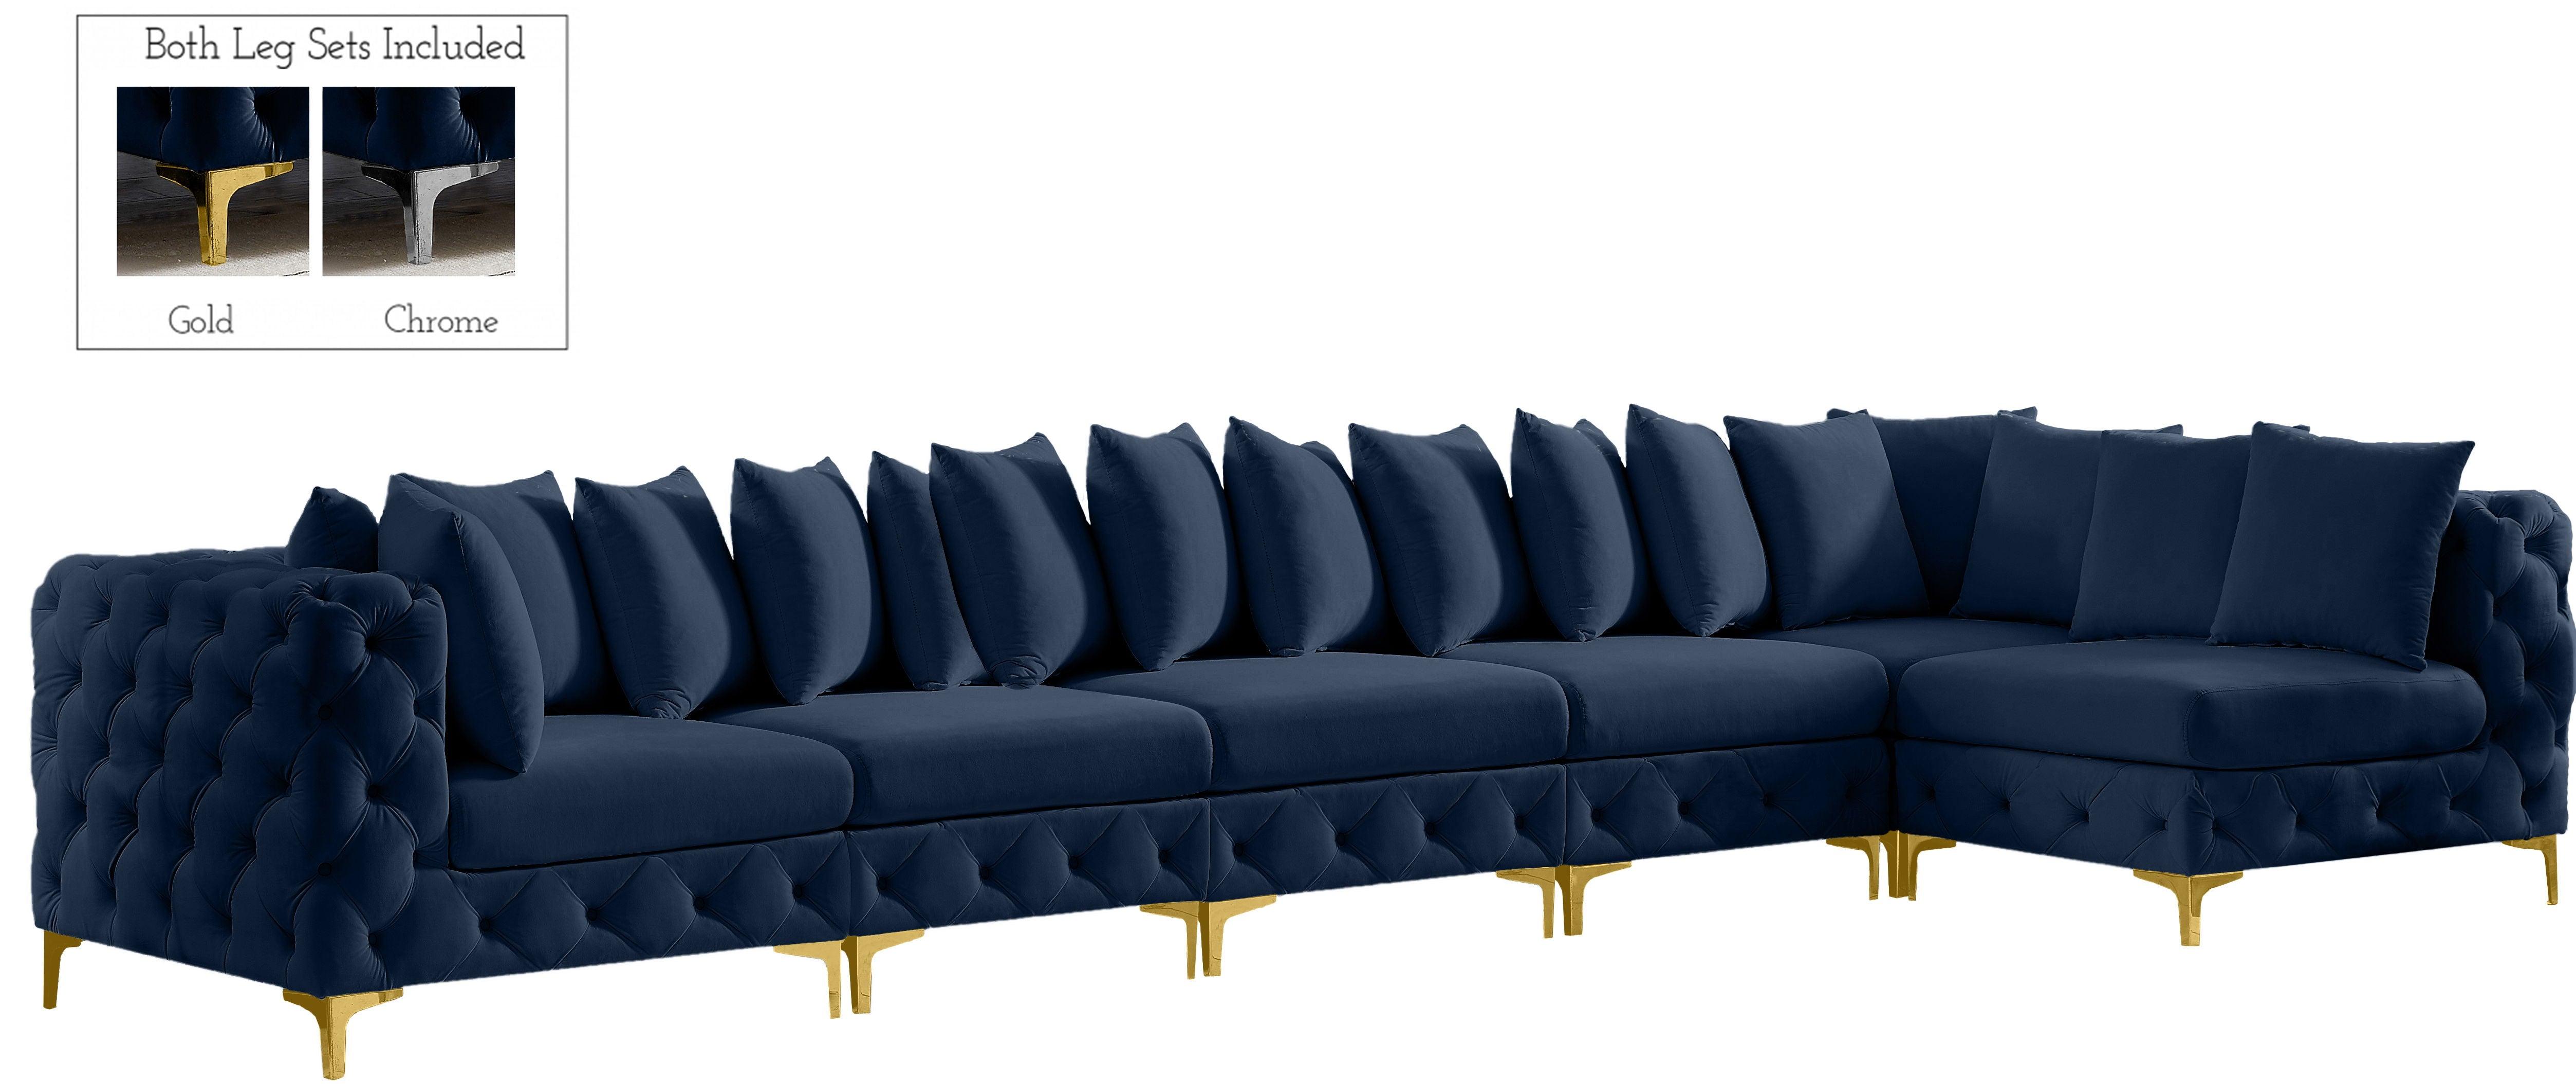 Meridian Furniture - Tremblay - Modular Sectional 6 Piece - Navy - 5th Avenue Furniture